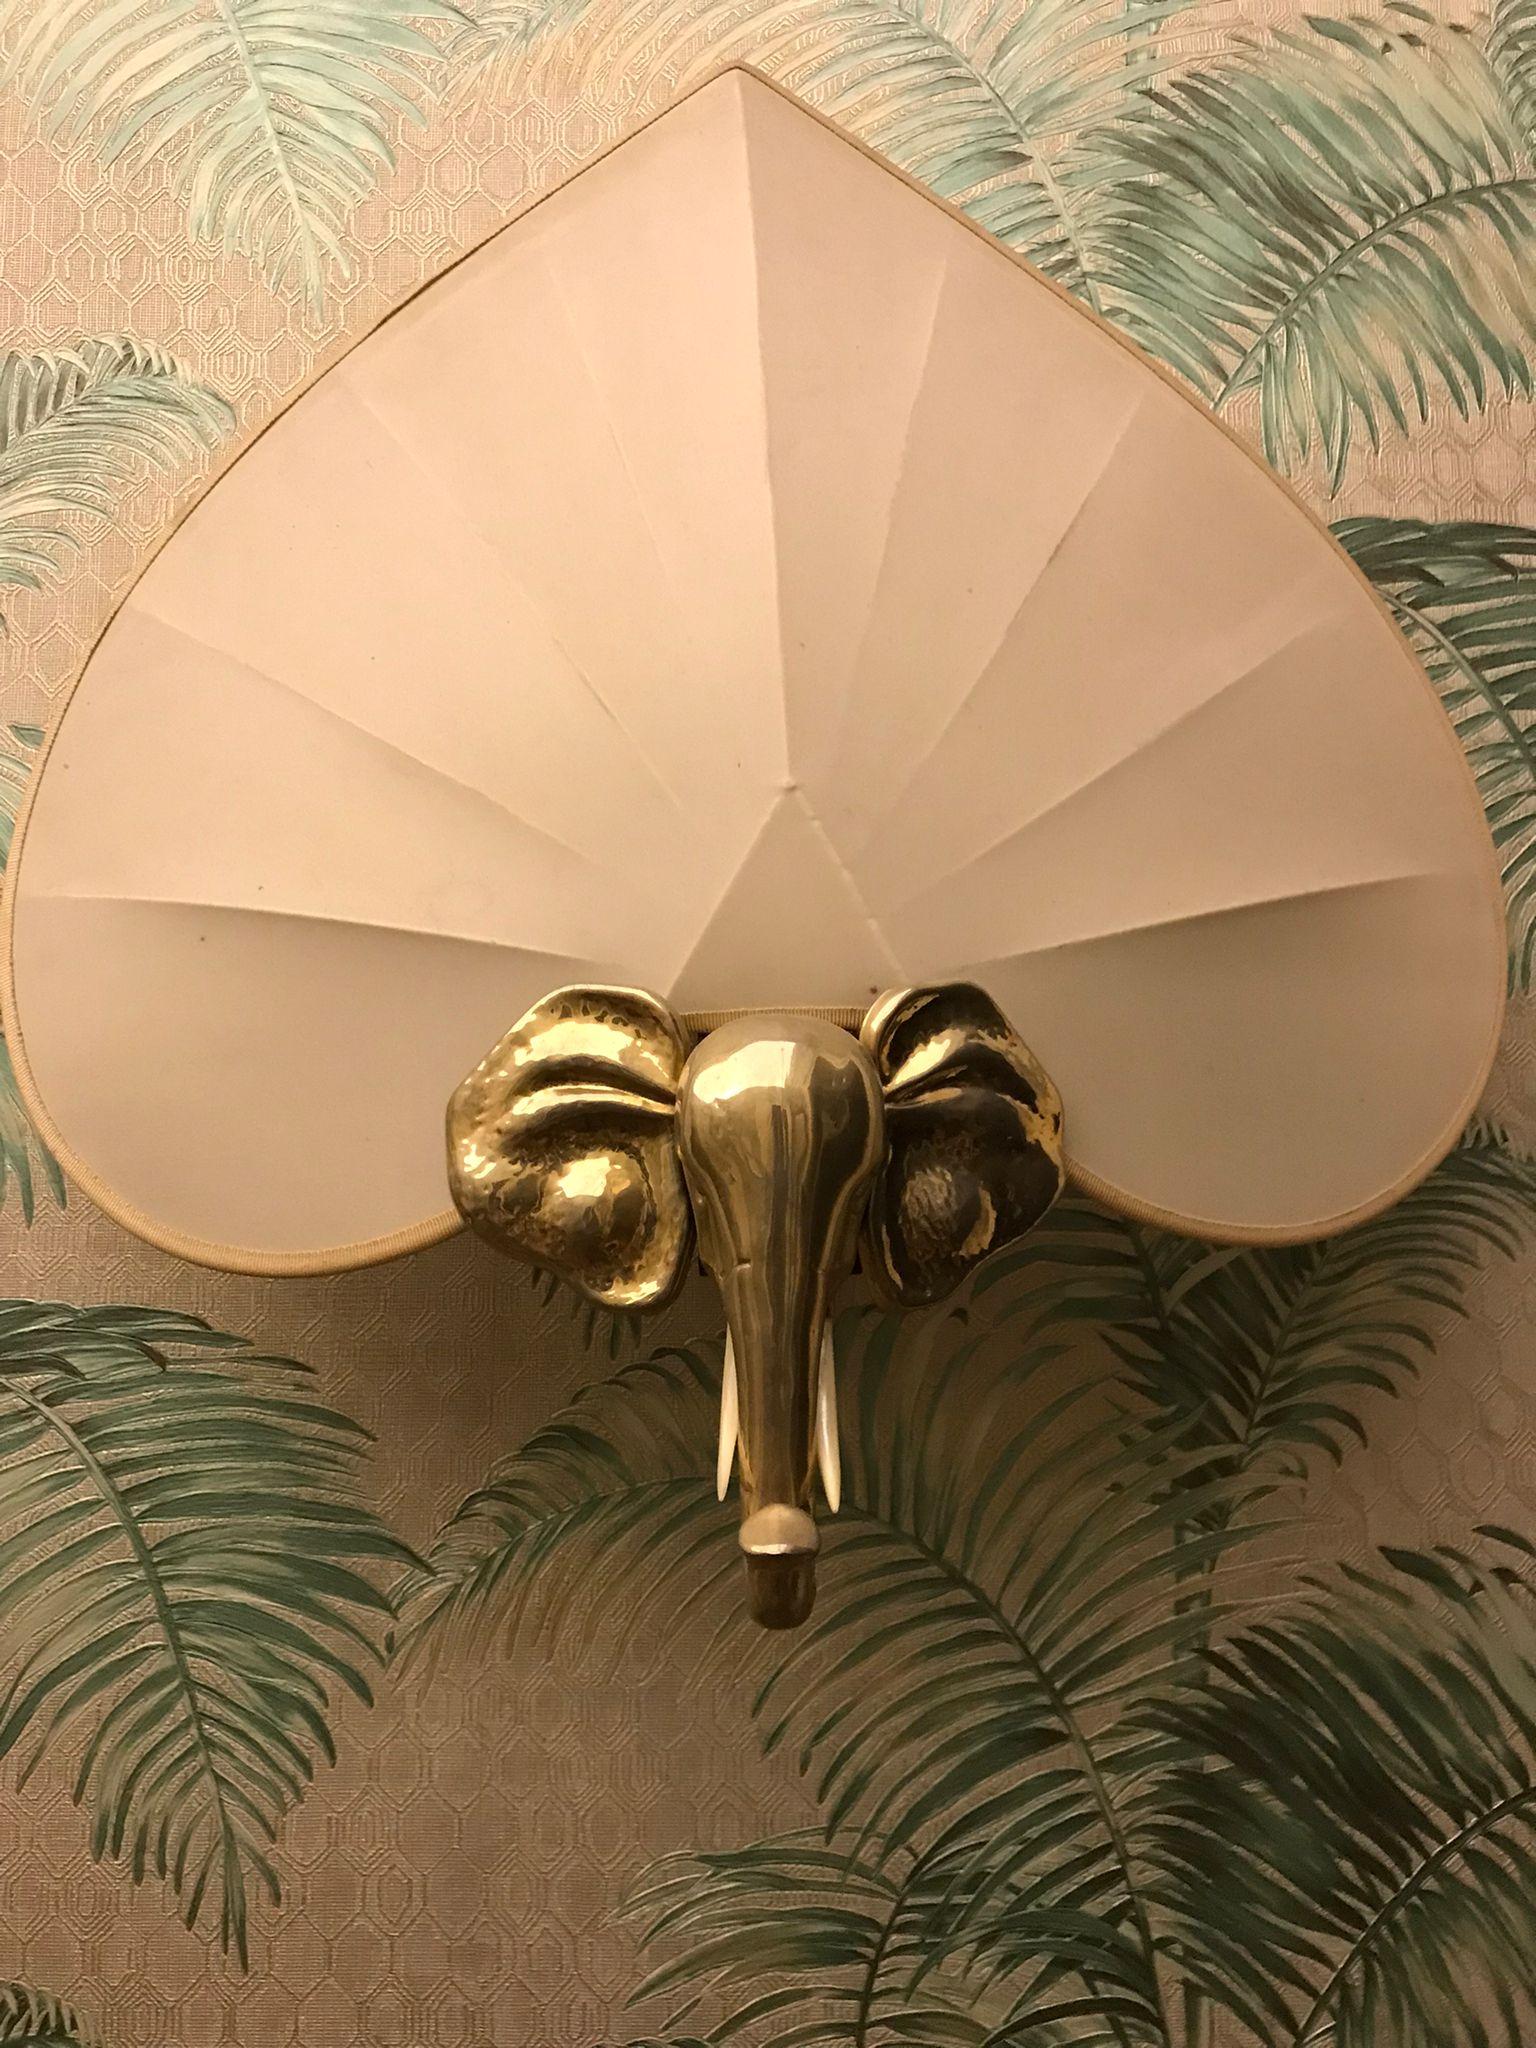 Unique set of three wall lights in silver plate in the shape of  elephant heads adorned with mother-of-pearl tasks and beautiful silk shades.
In excellent vintage condition
France, circa 1930s.